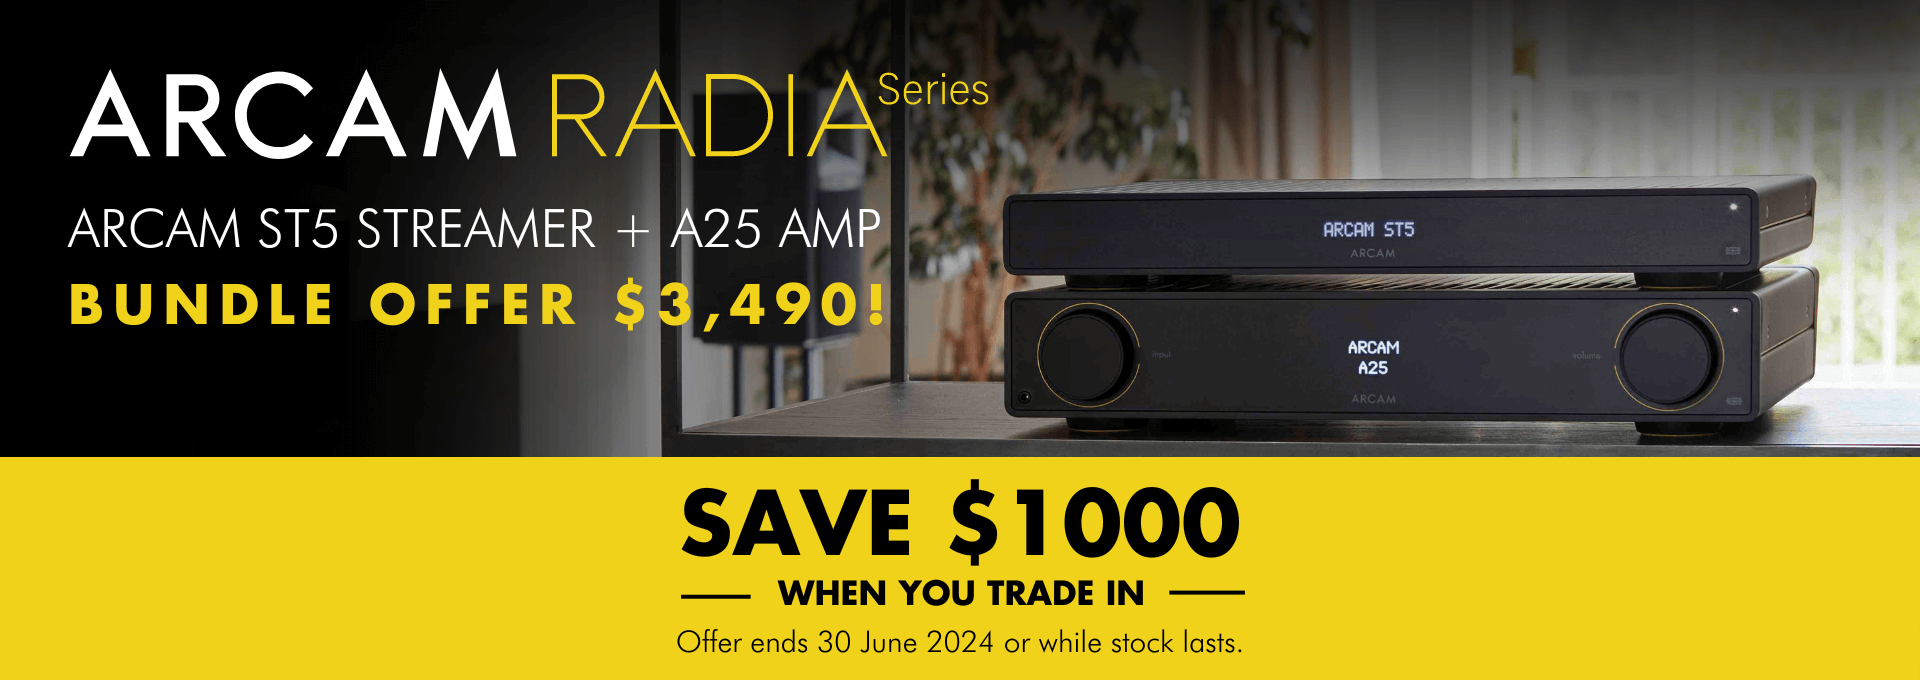 Arcam Trade in Promotion